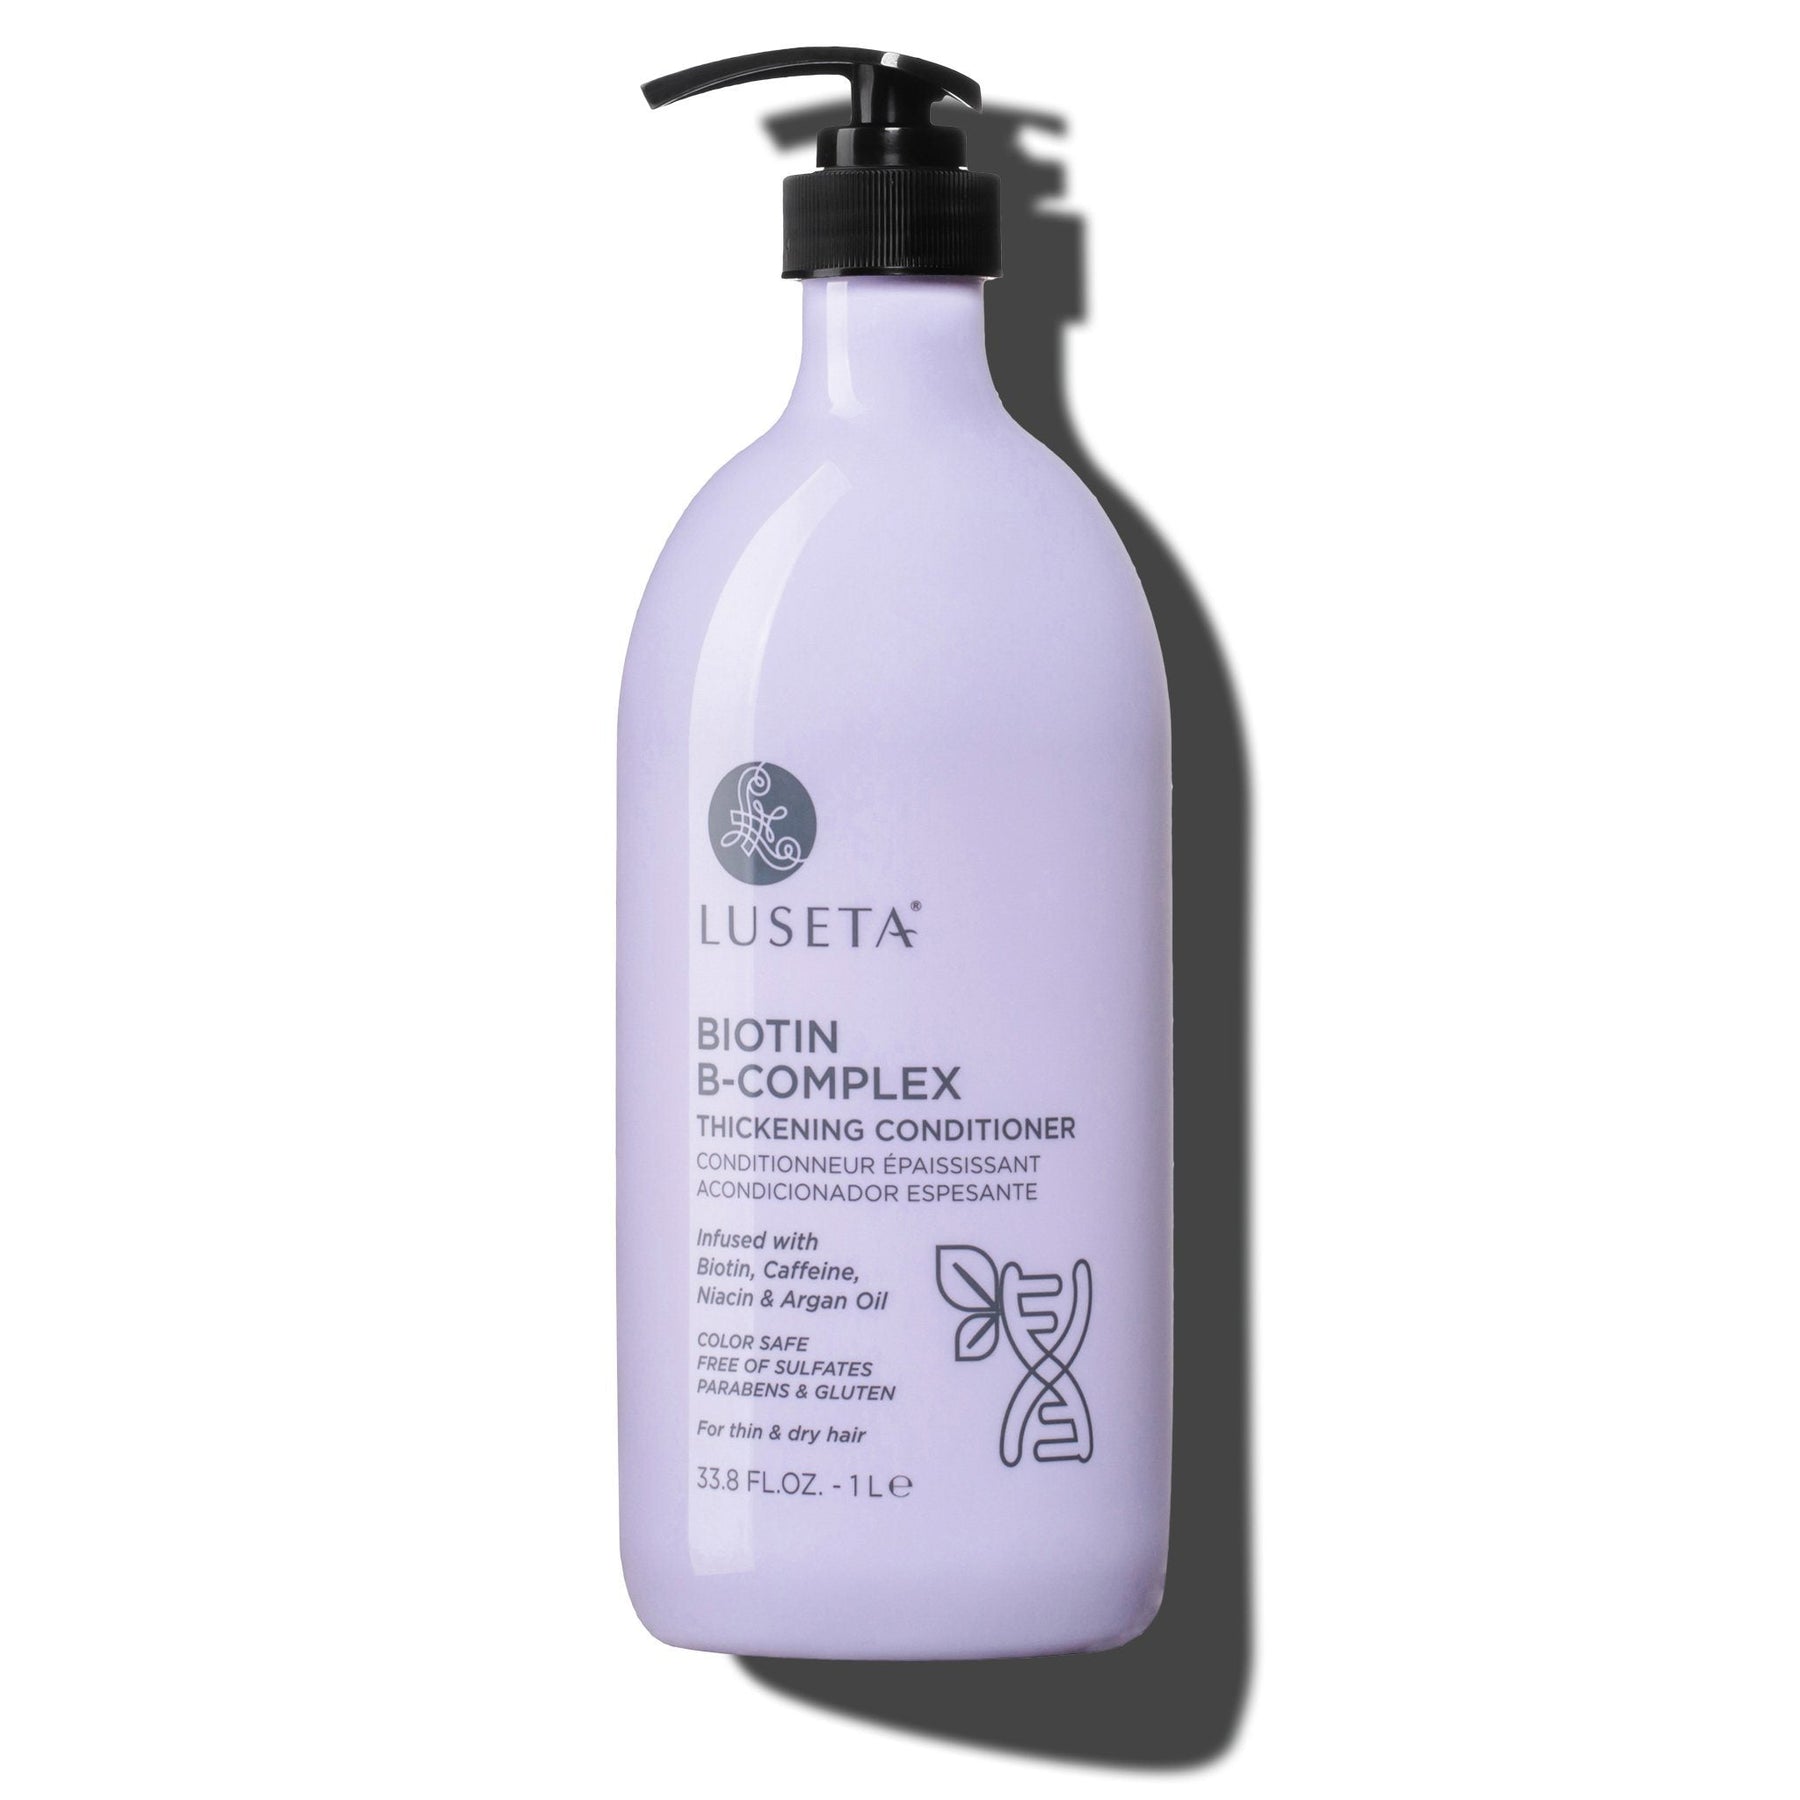 Biotin B-Complex Thickening Conditioner - 33.8oz - by Luseta Beauty |ProCare Outlet|